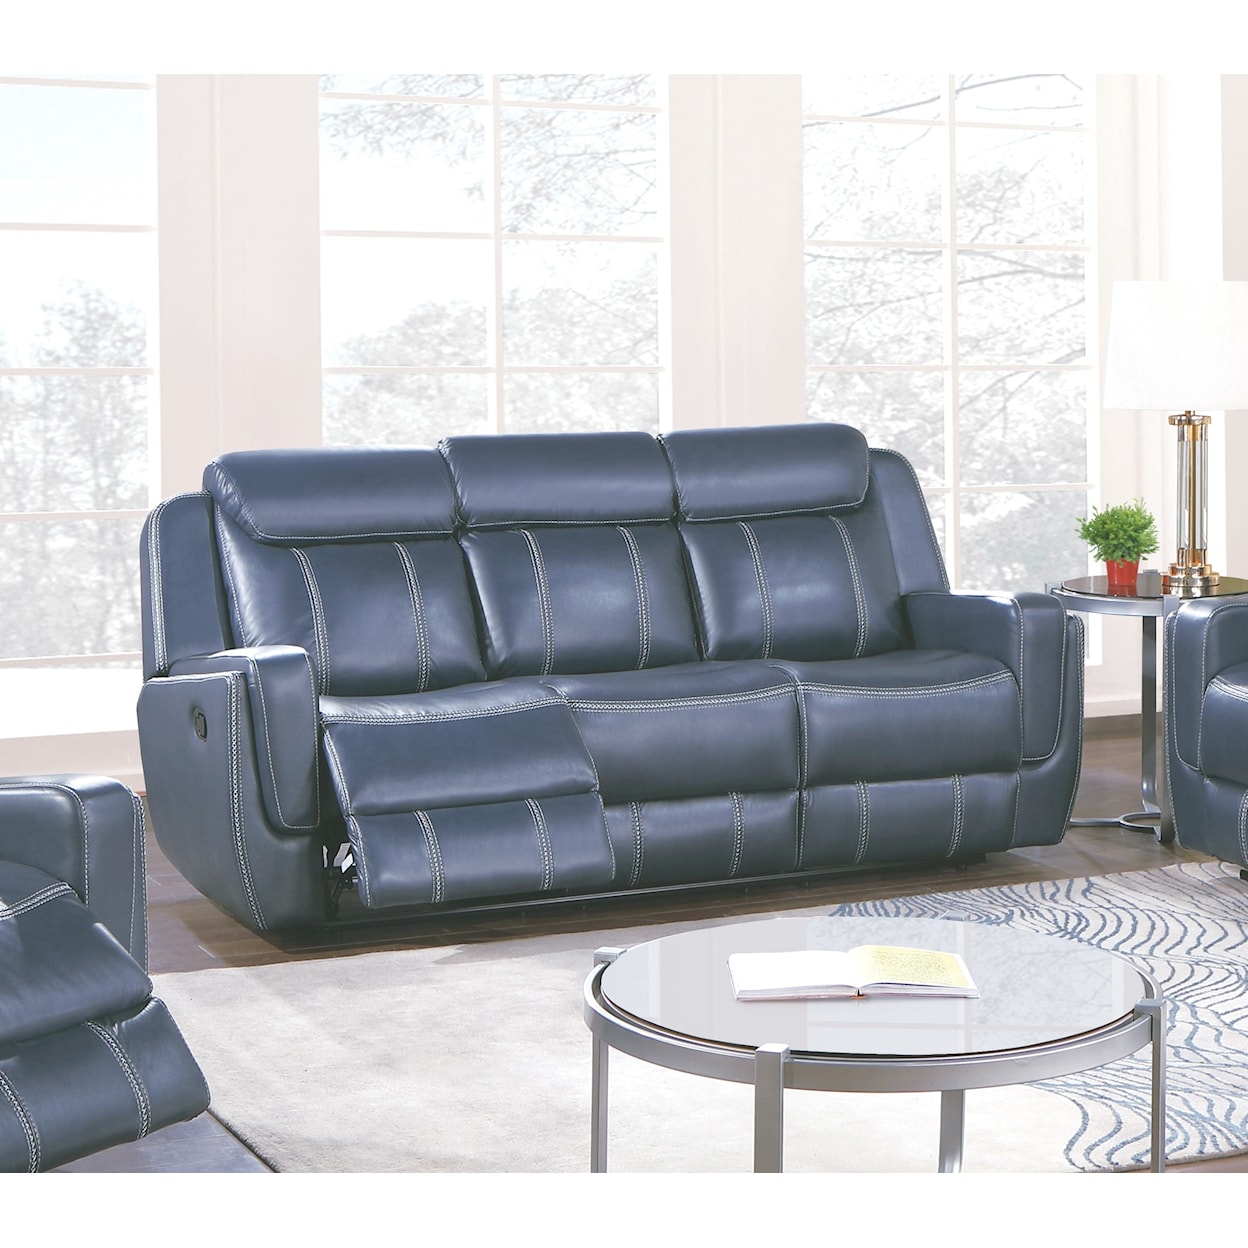 Lifestyle Denver Faux Leather Reclining Sofa